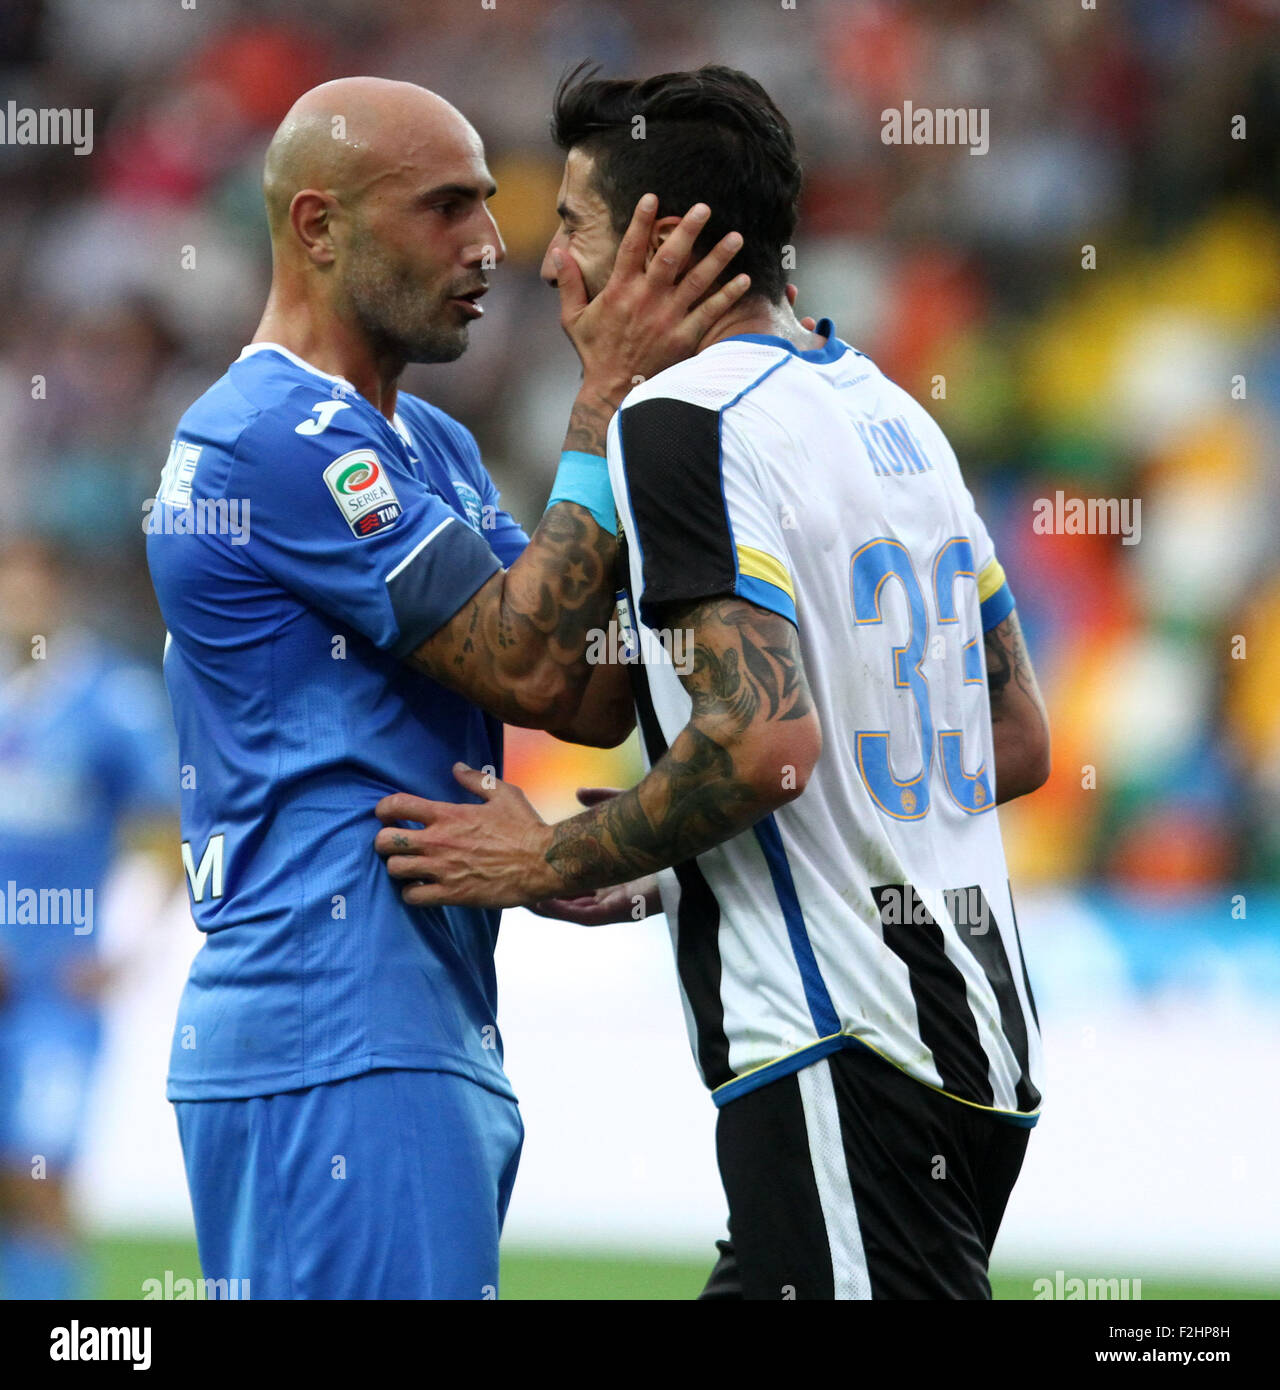 Udine, Italy. 19th September, 2015. Empoli's forward Massimo Maccarone reacts with Udinese's midfielder Panagiotis Kone during the Italian Serie A football match between Udinese Calcio v Empoli at Friuli Stadium on 19 September, 2015 in Udine. Credit:  Andrea Spinelli/Alamy Live News Stock Photo